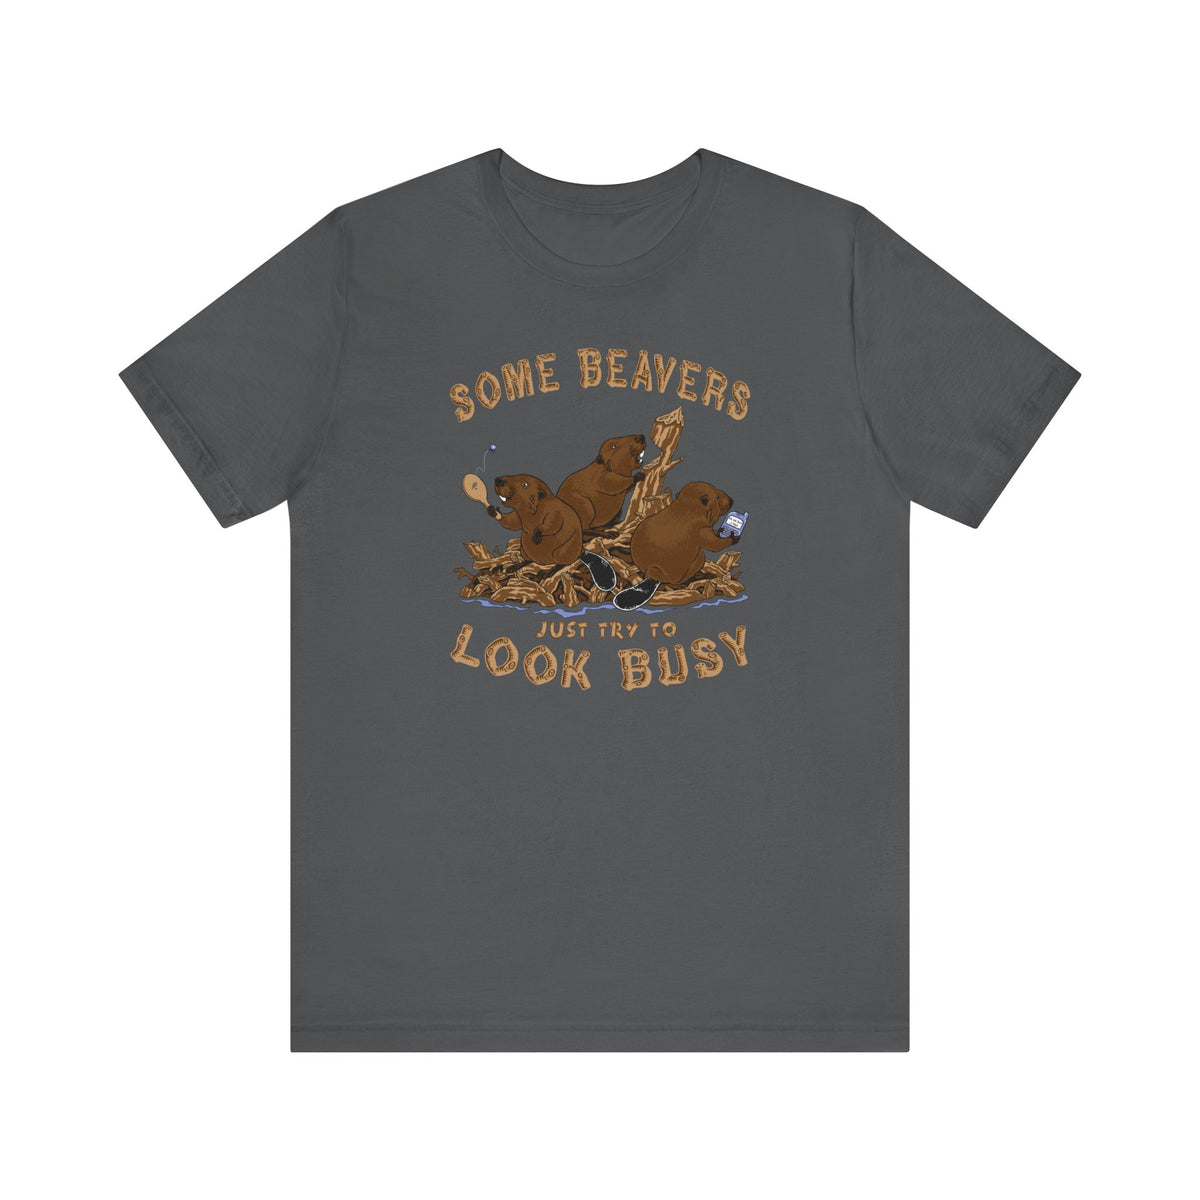 Some Beavers Just Try To Look Busy - Men's T-Shirt